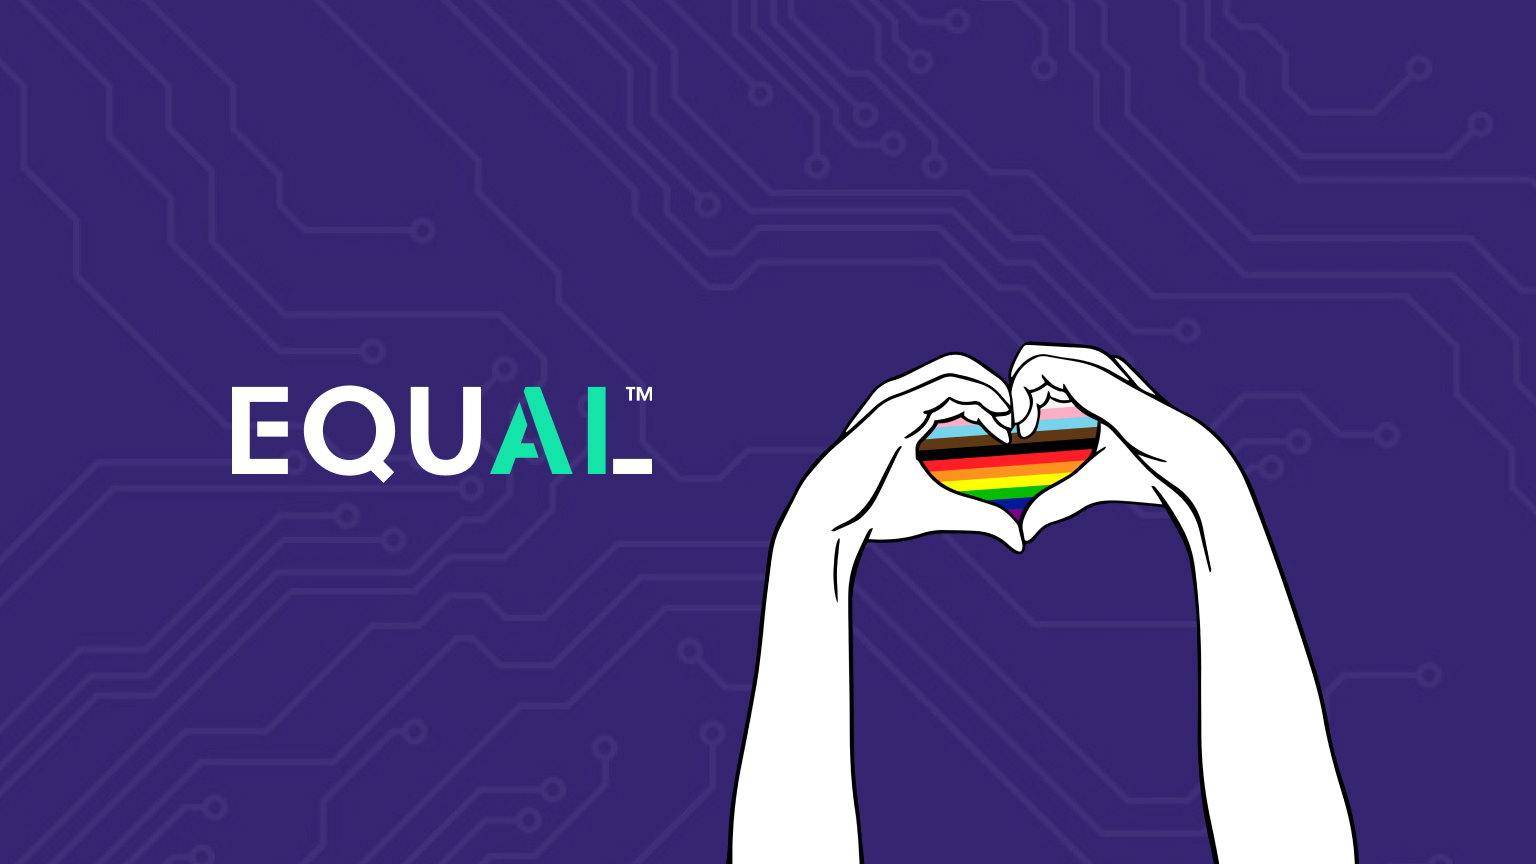 EqualAI and being an LGBTQ+ ally